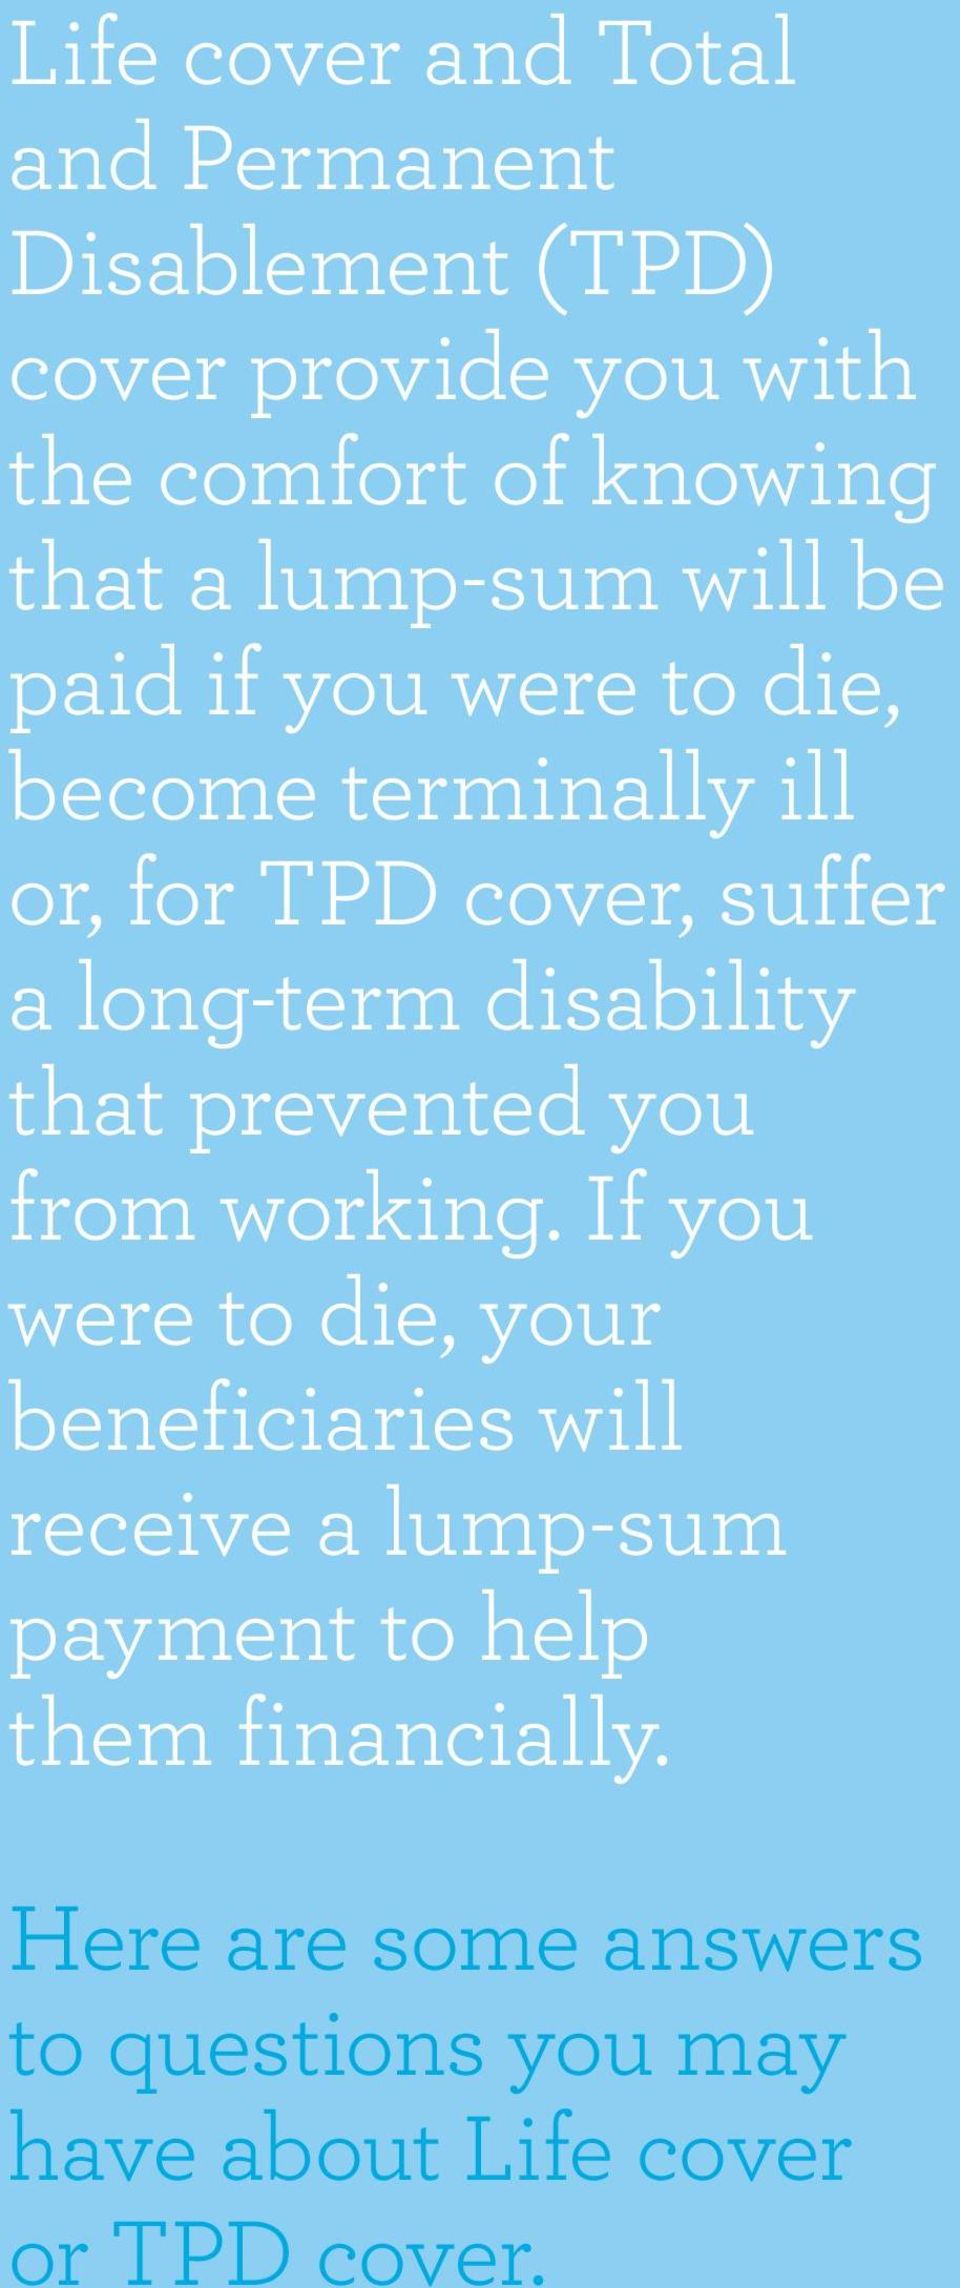 disability that prevented you from working.